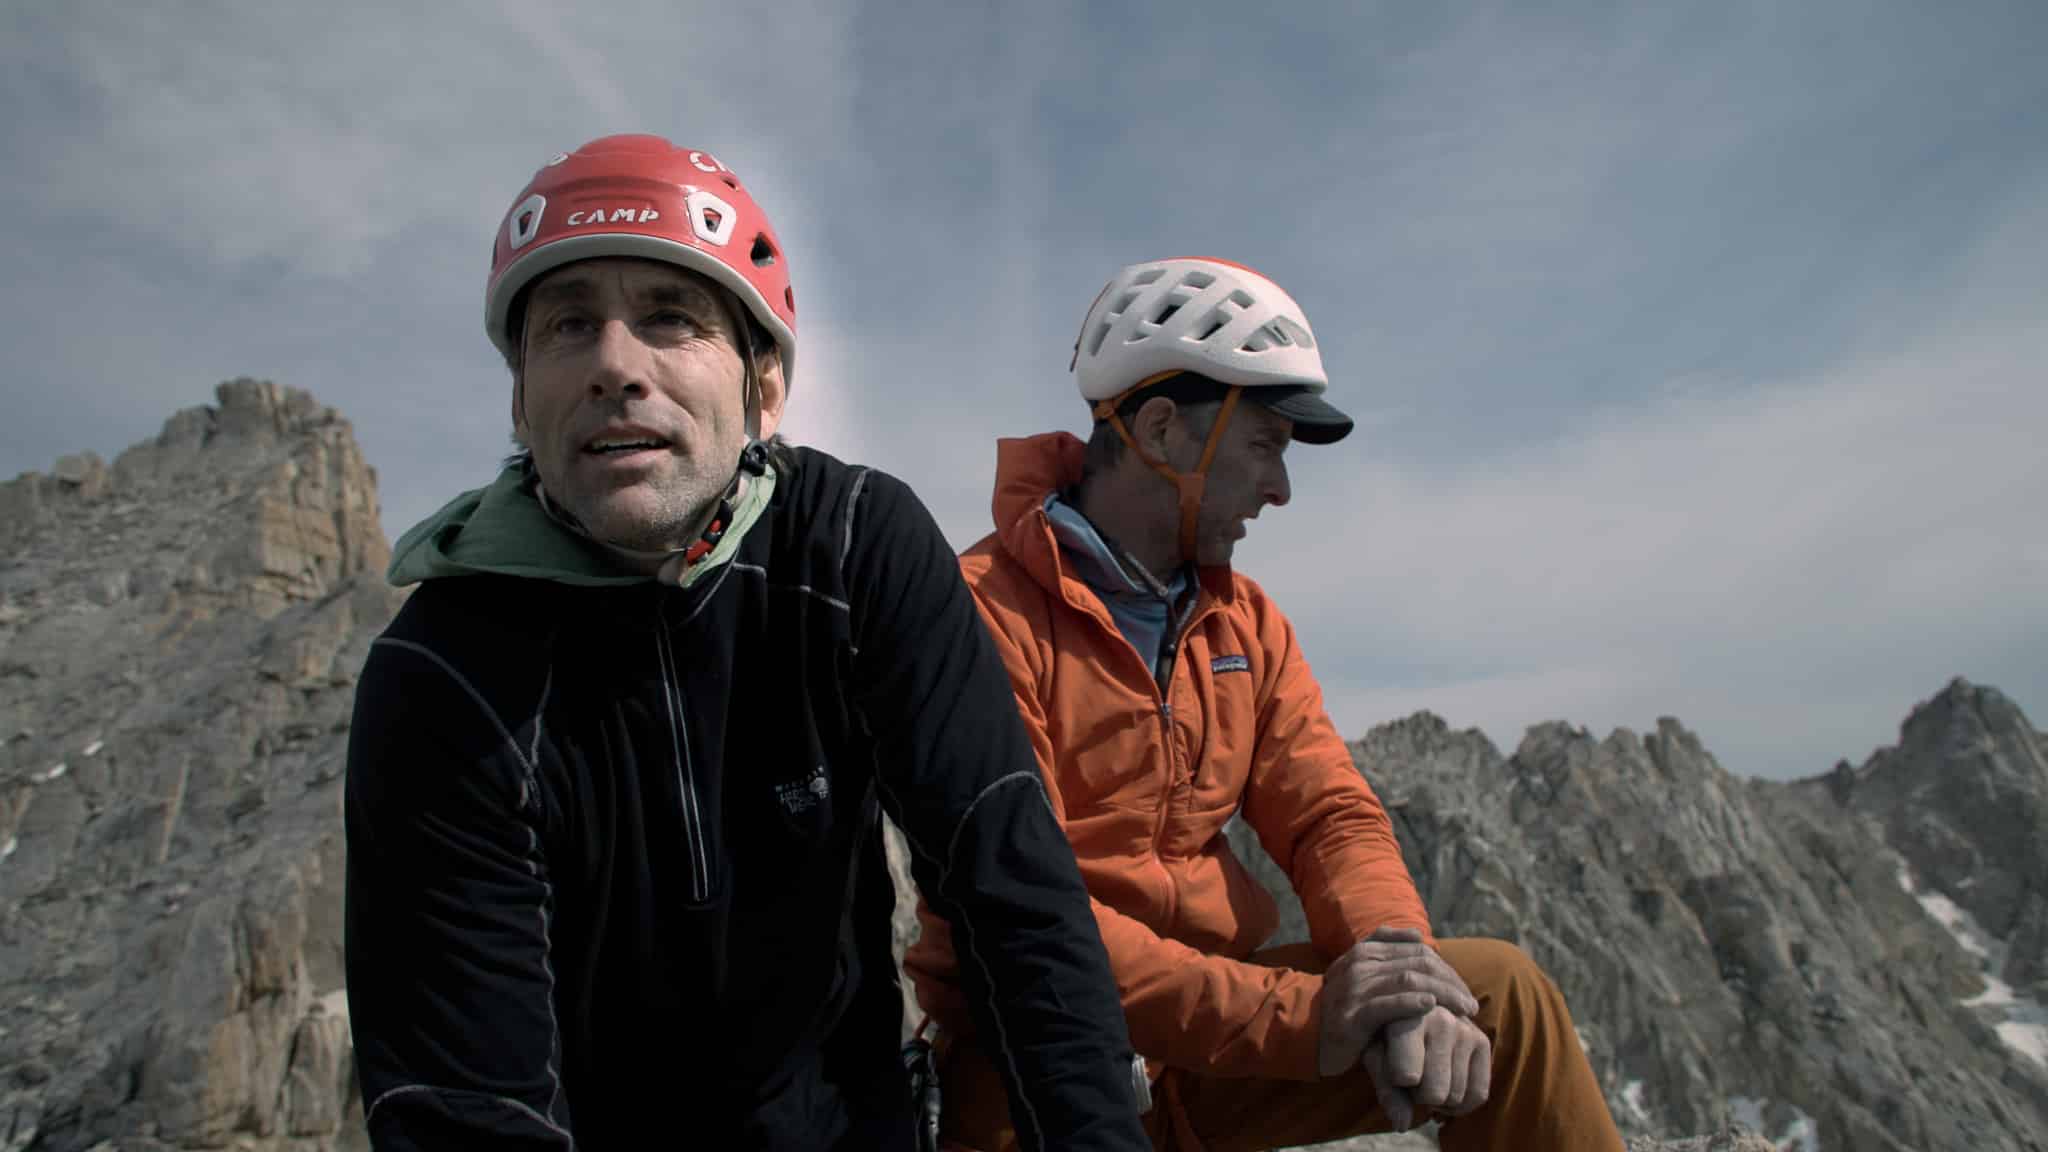 Two people in climbing helmets sitting on top of a mountain/rock face